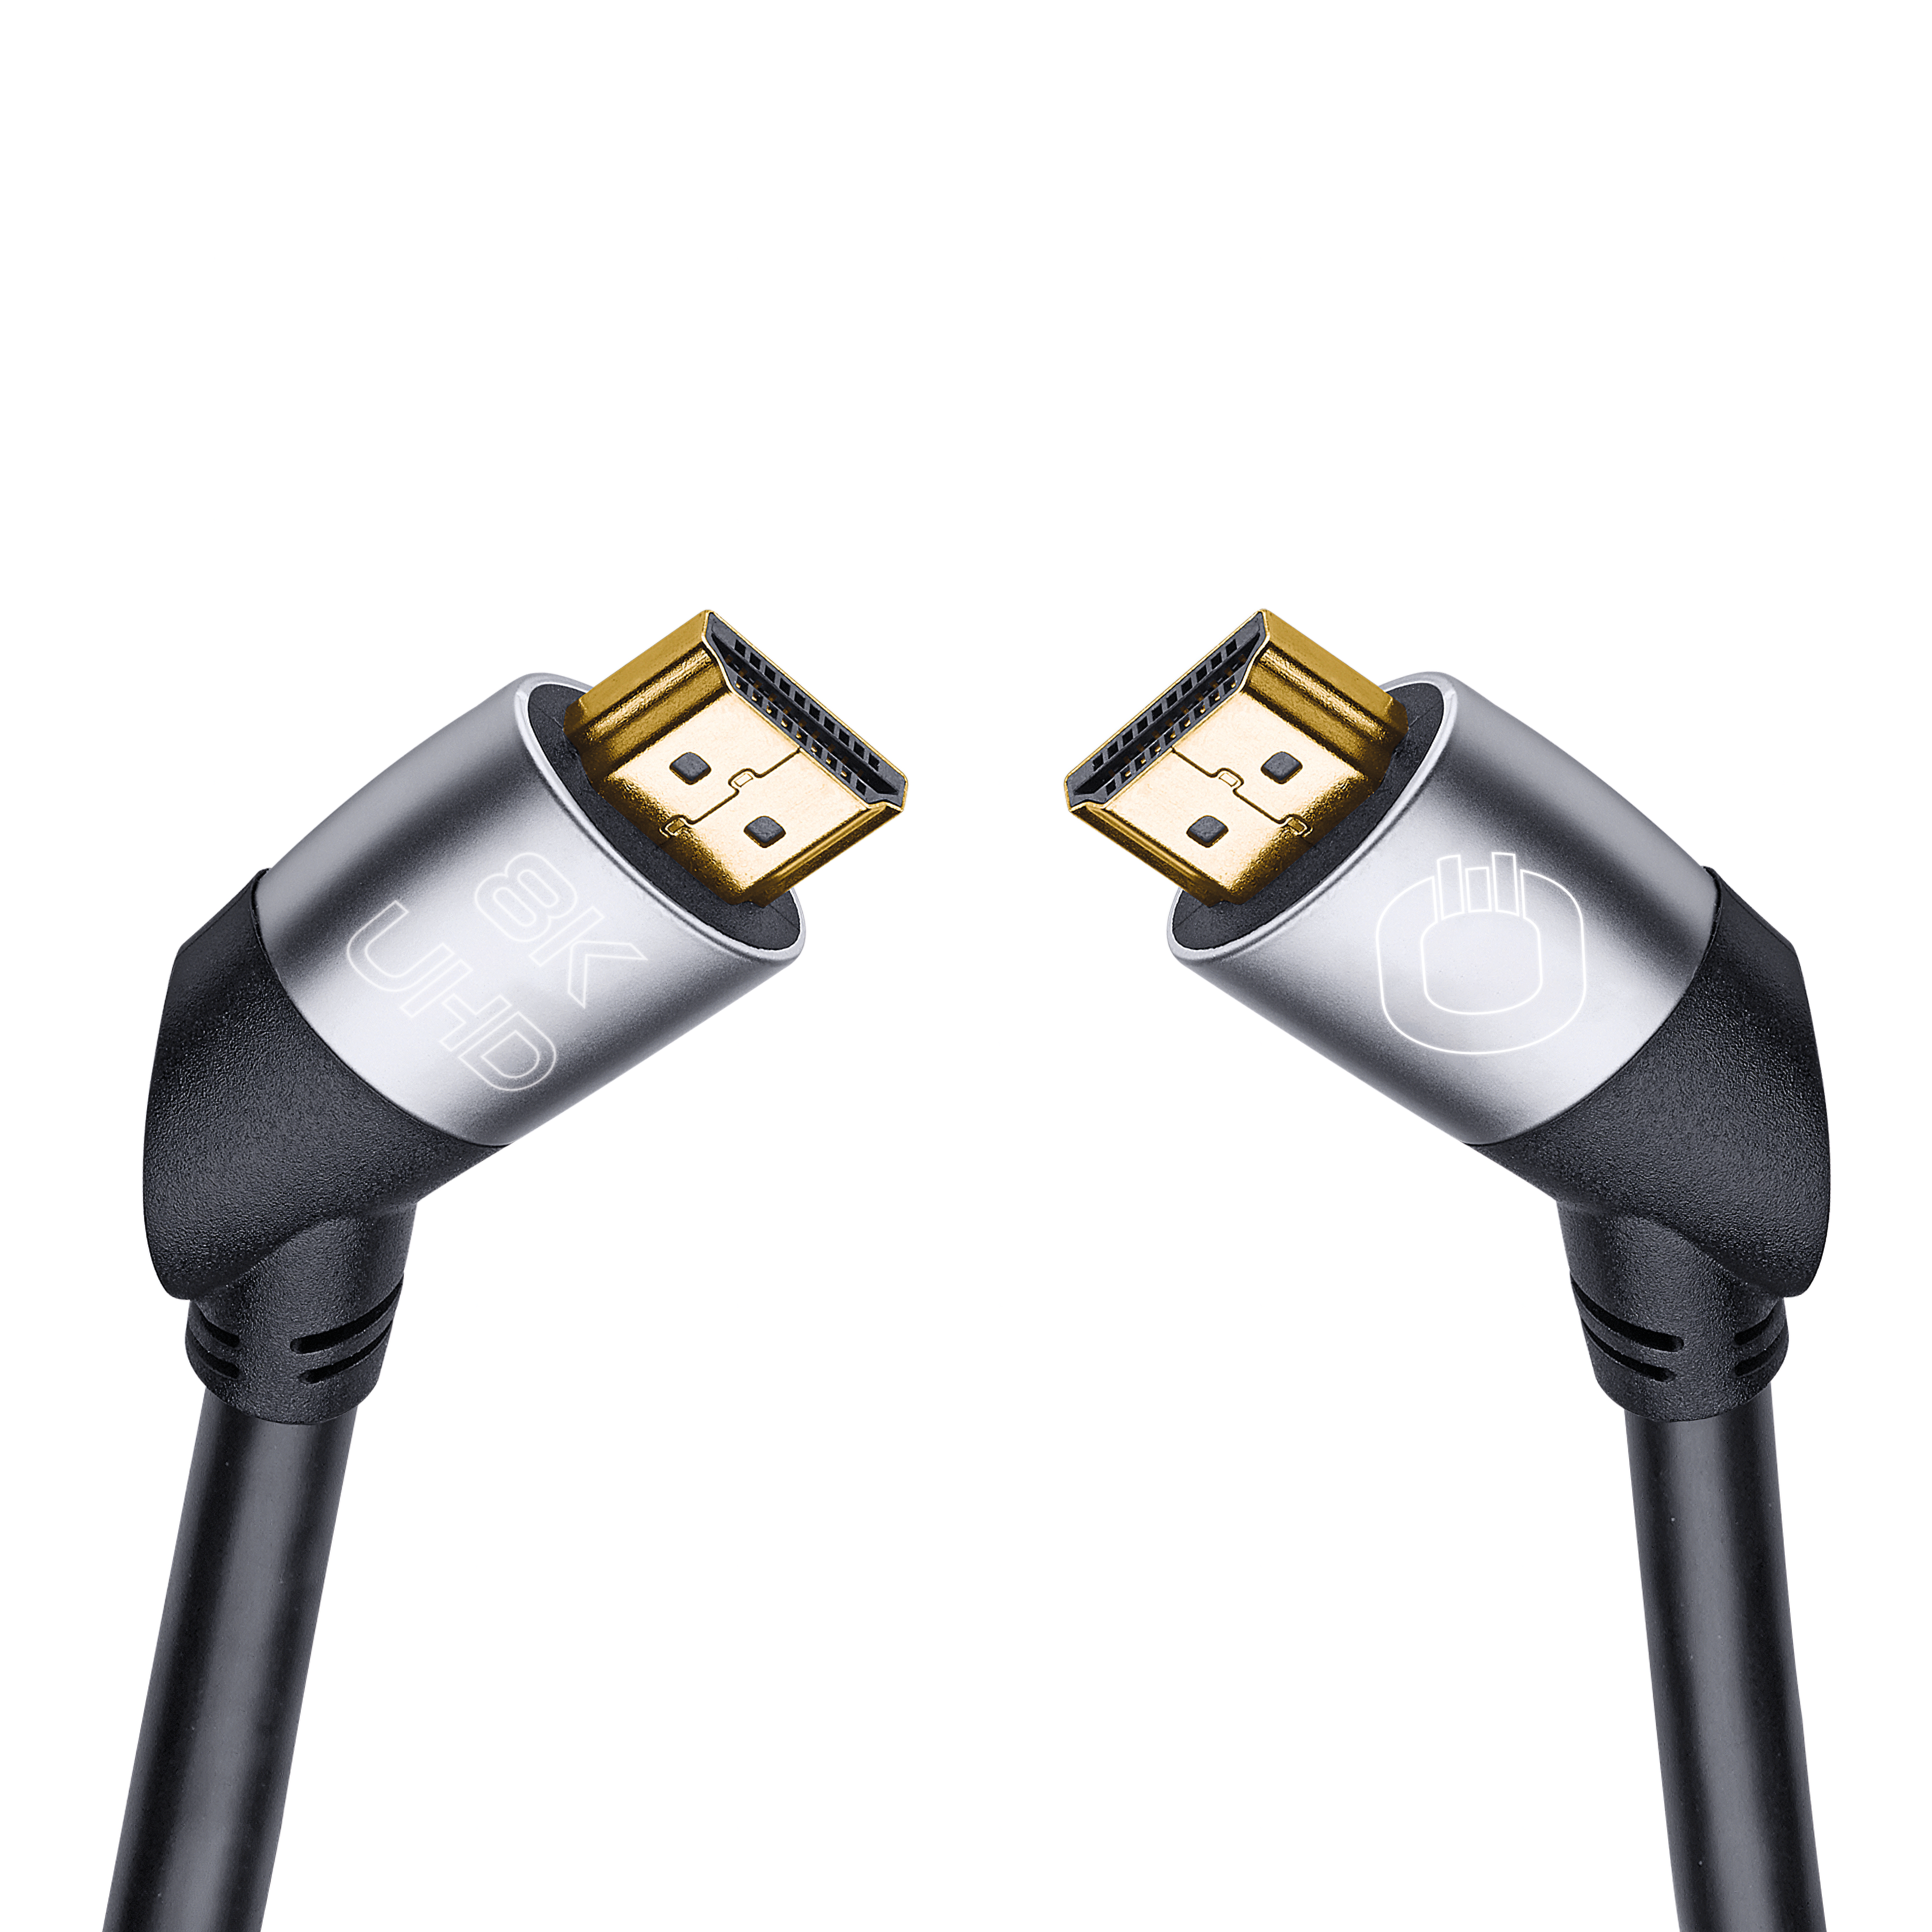 OEHLBACH Easy Connect 2 m HDMI Kabel, HDMI